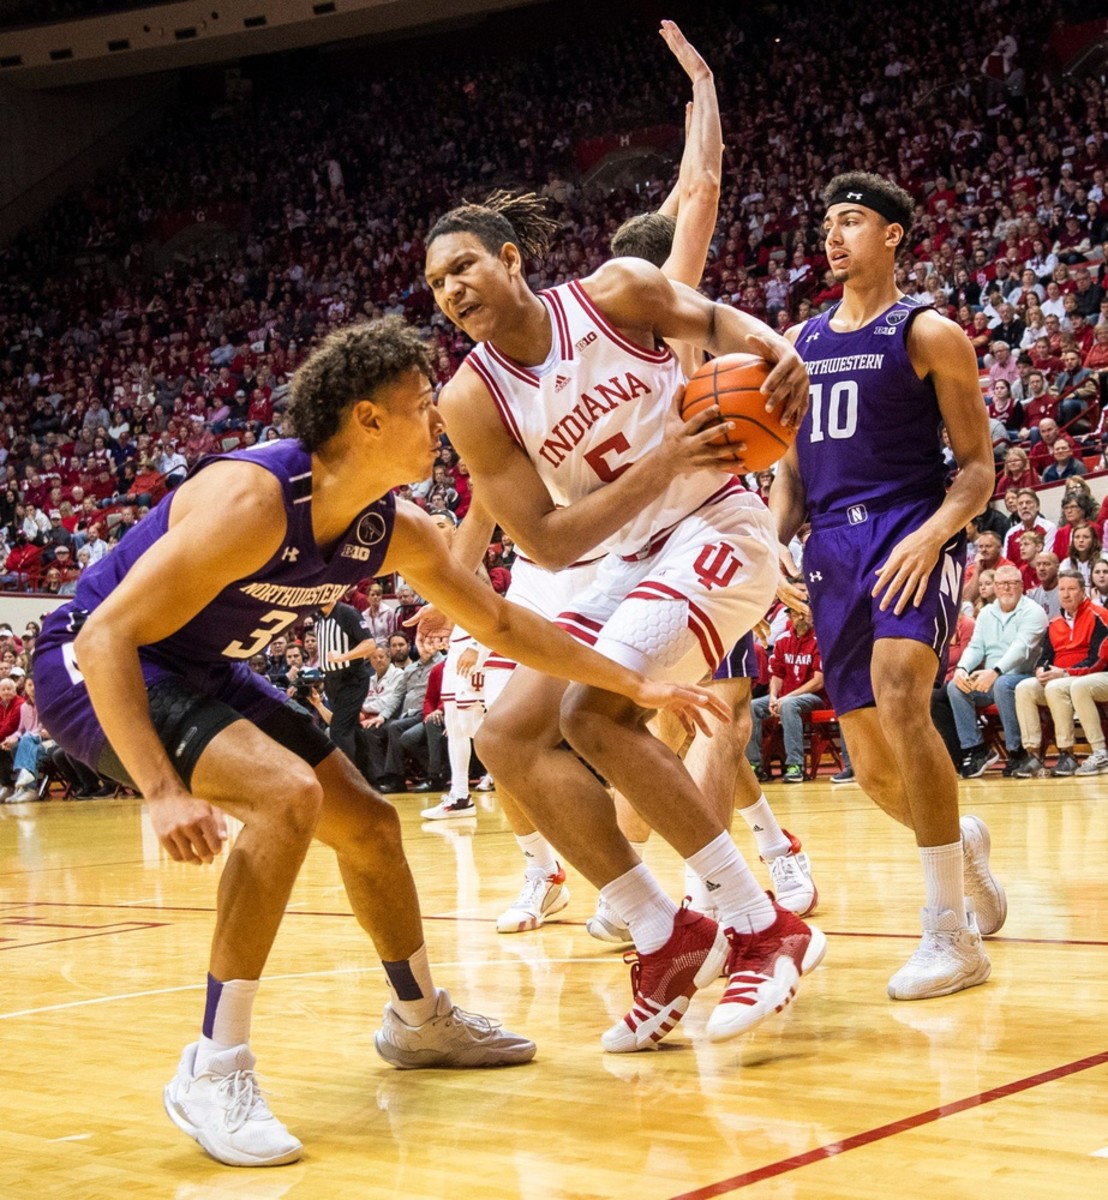 Indiana's Malik Reneau (5) grabs a loose ball during the first half ot the Indiana versus Northwestern men's basketball game at Simon Skjodt Assembly Hall.